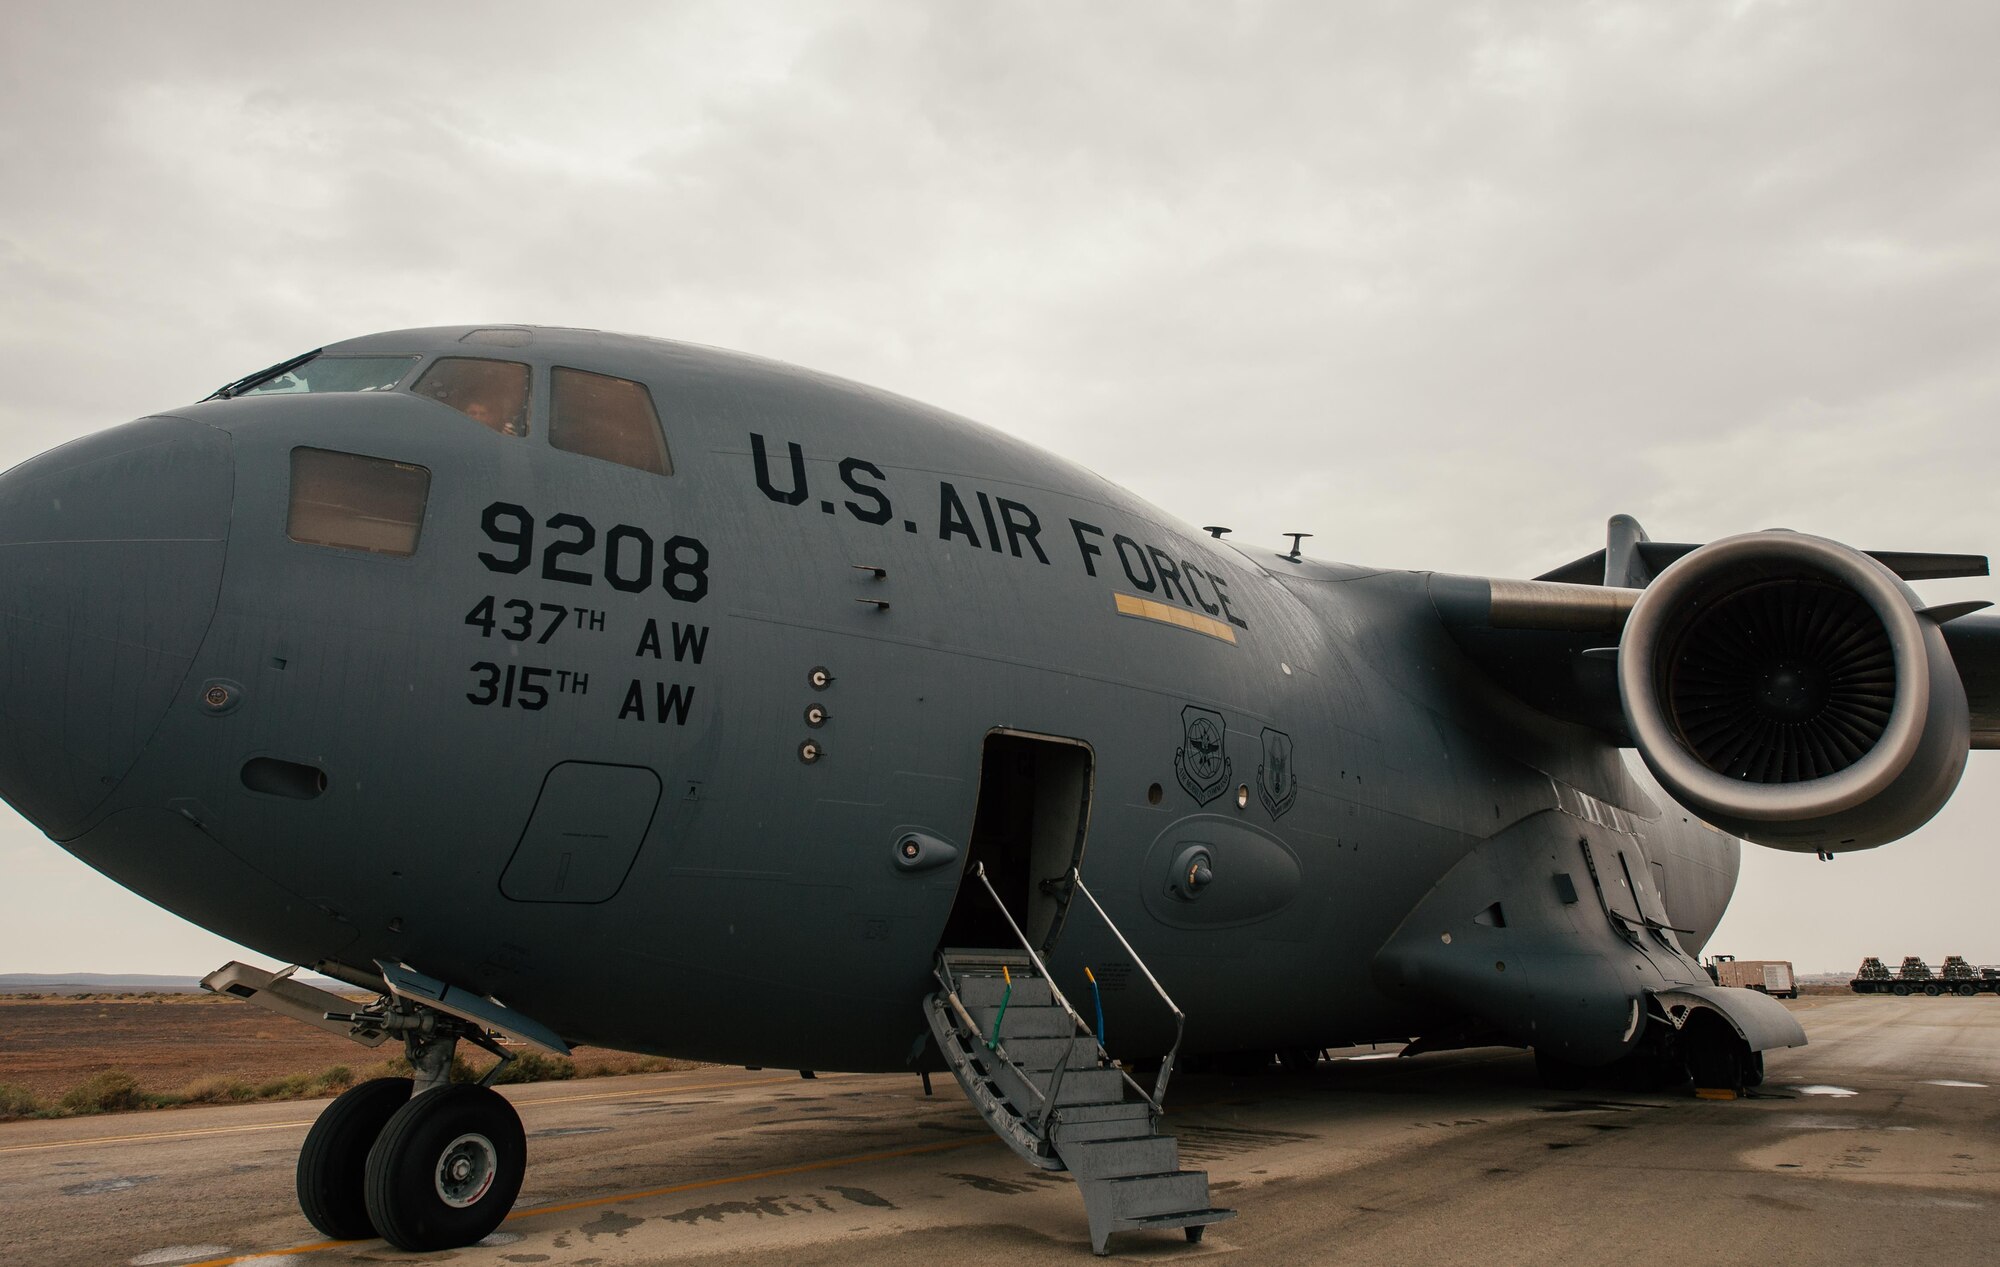 An 816th Expeditionary Airlift Squadron C-17 Globemaster III sits on a flightline in an undisclosed location while cargo is unloaded in support of Combined Joint Task Force - Operation Inherent Resolve, Oct. 28, 2016. The squadron is actively engaged in tactical airlift operations supporting the Mosul offensive. (U.S. Air Force photo by Senior Airman Jordan Castelan)